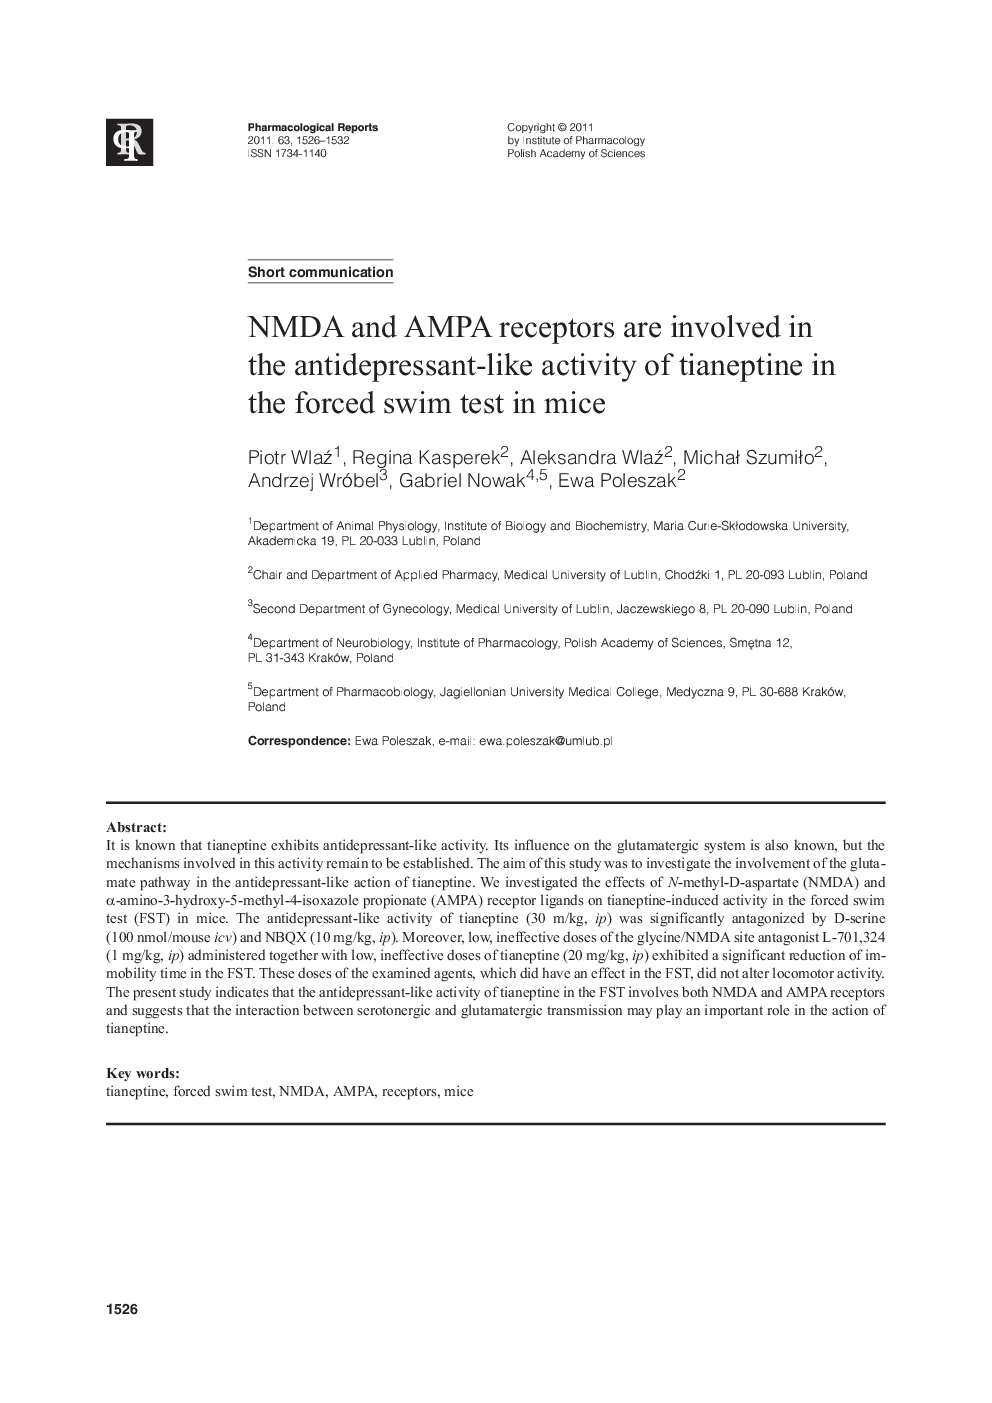 NMDA and AMPA receptors are involved in the antidepressant-like activity of tianeptine in the forced swim test in mice